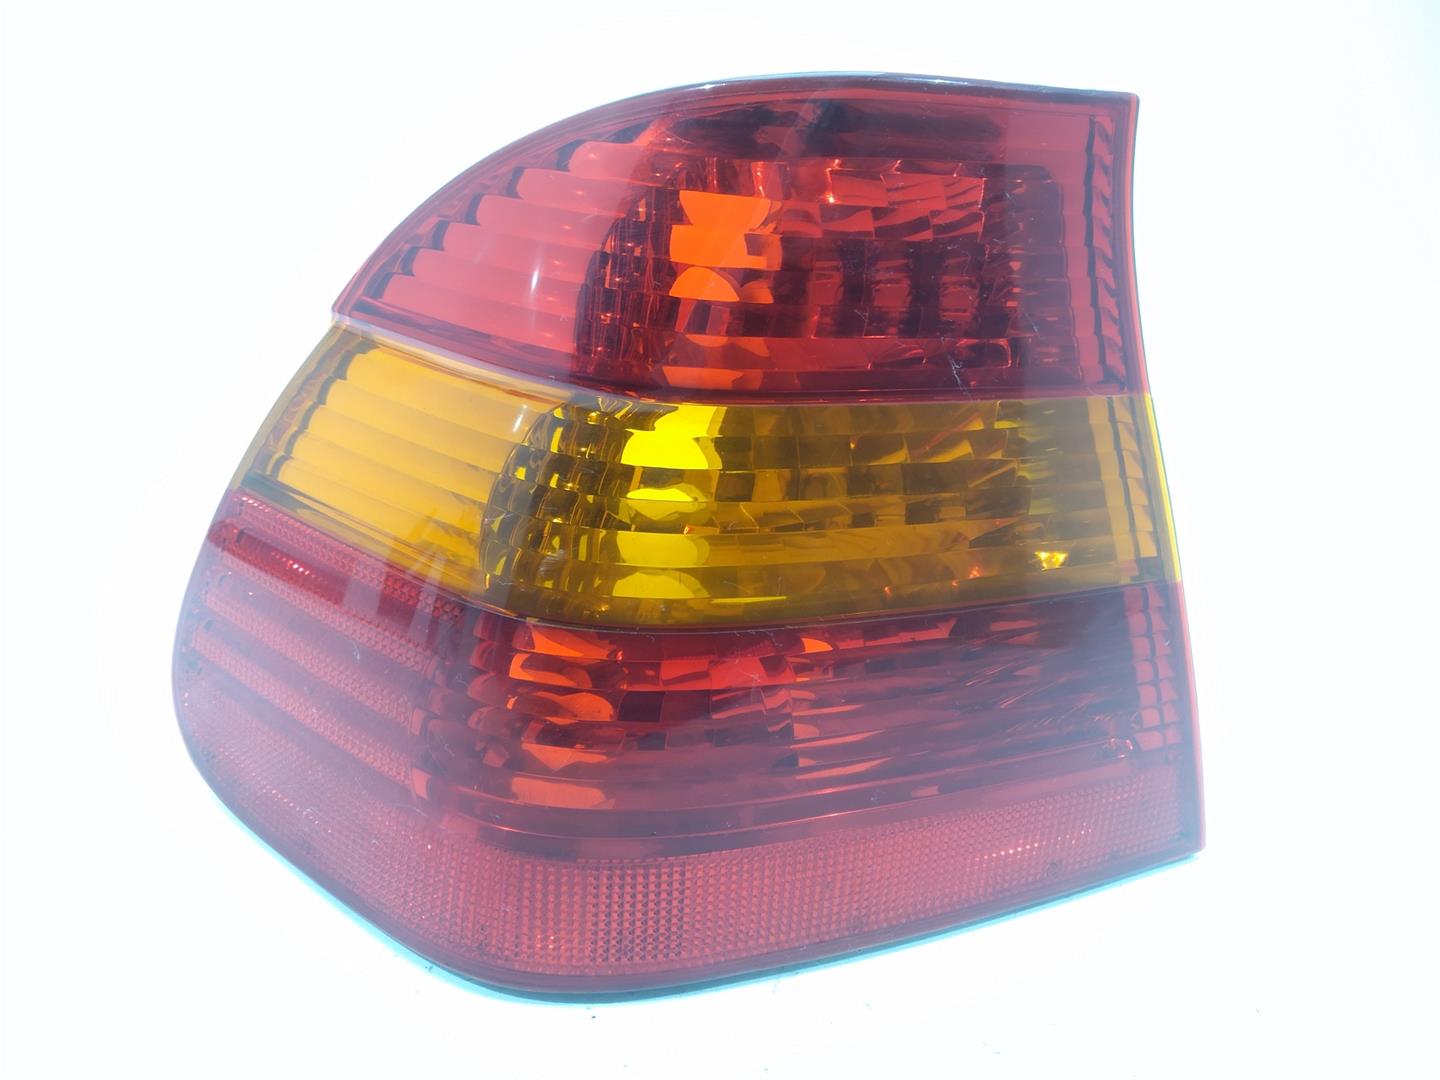 BMW 3 Series E46 (1997-2006) Rear Left Taillight 694653301, 694653301, 694653301 24512190